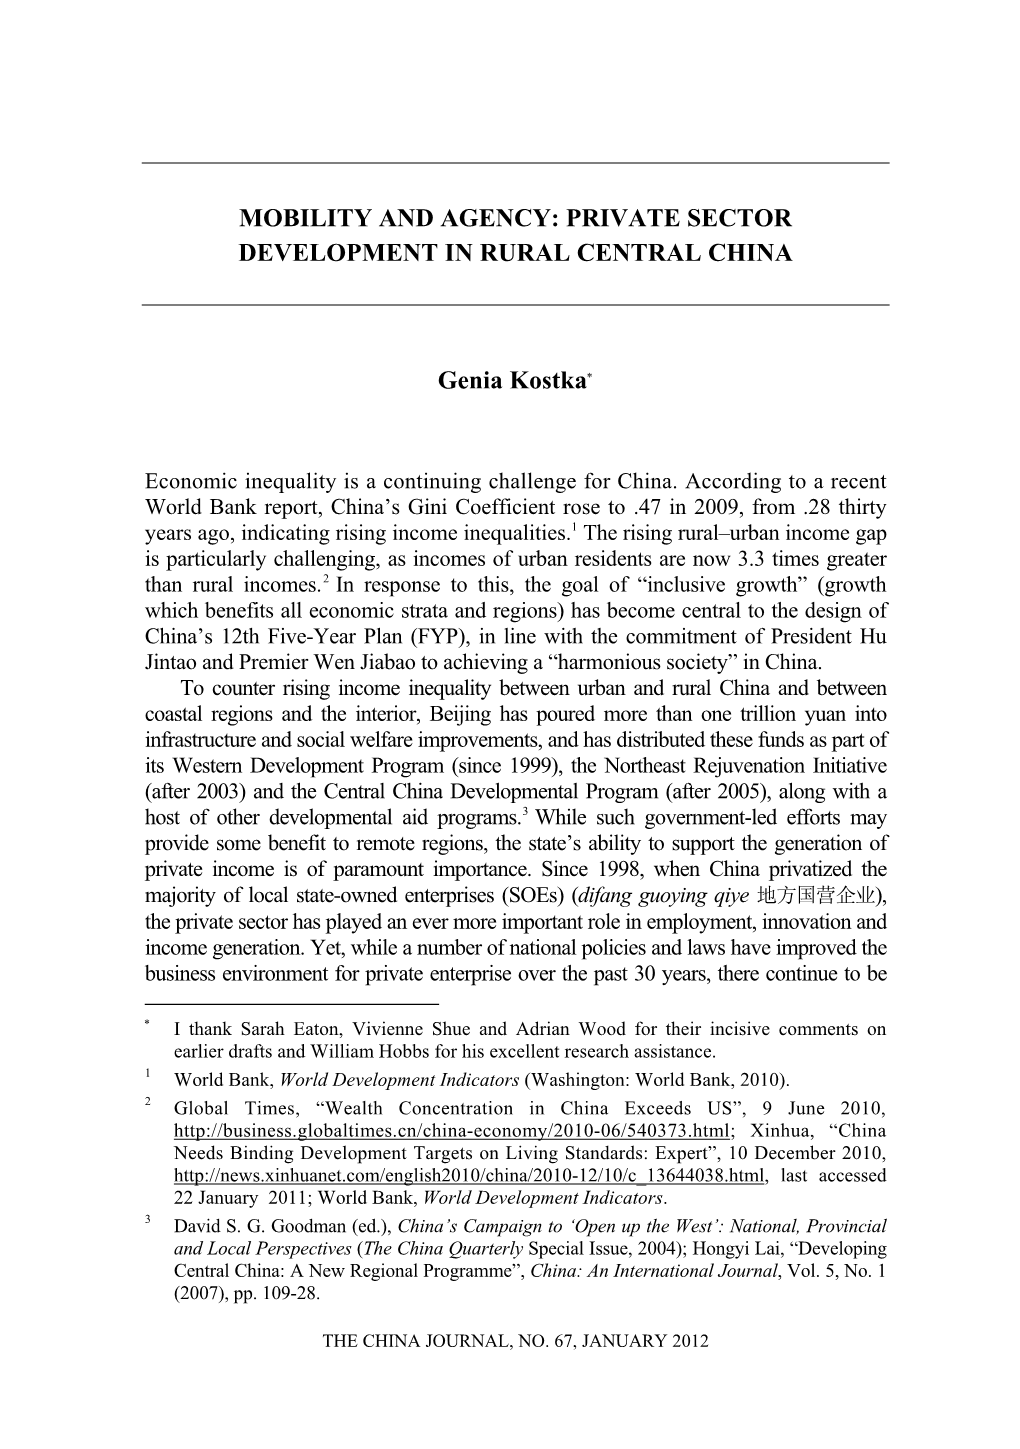 Mobility and Agency: Private Sector Development in Rural Central China